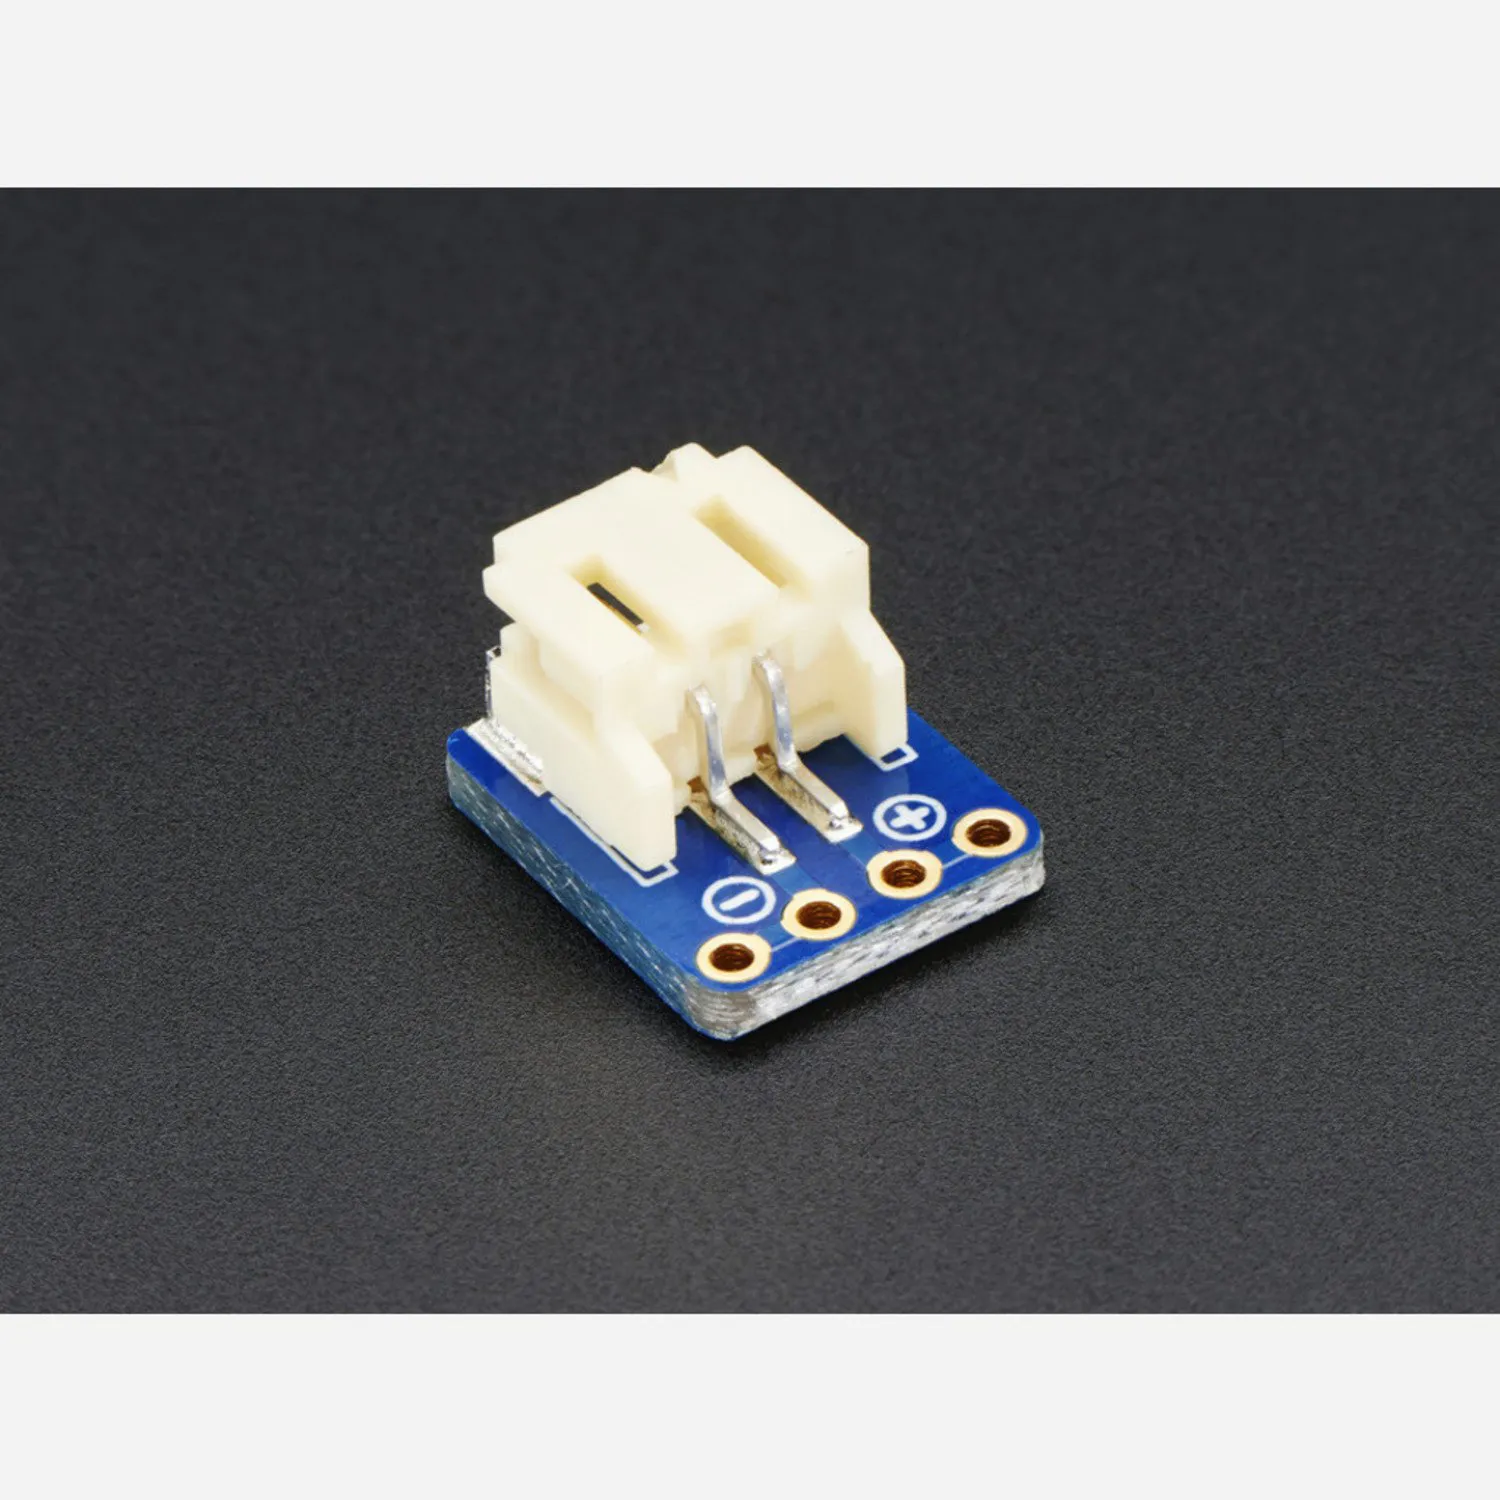 Photo of JST-PH 2-Pin SMT Right Angle Breakout Board